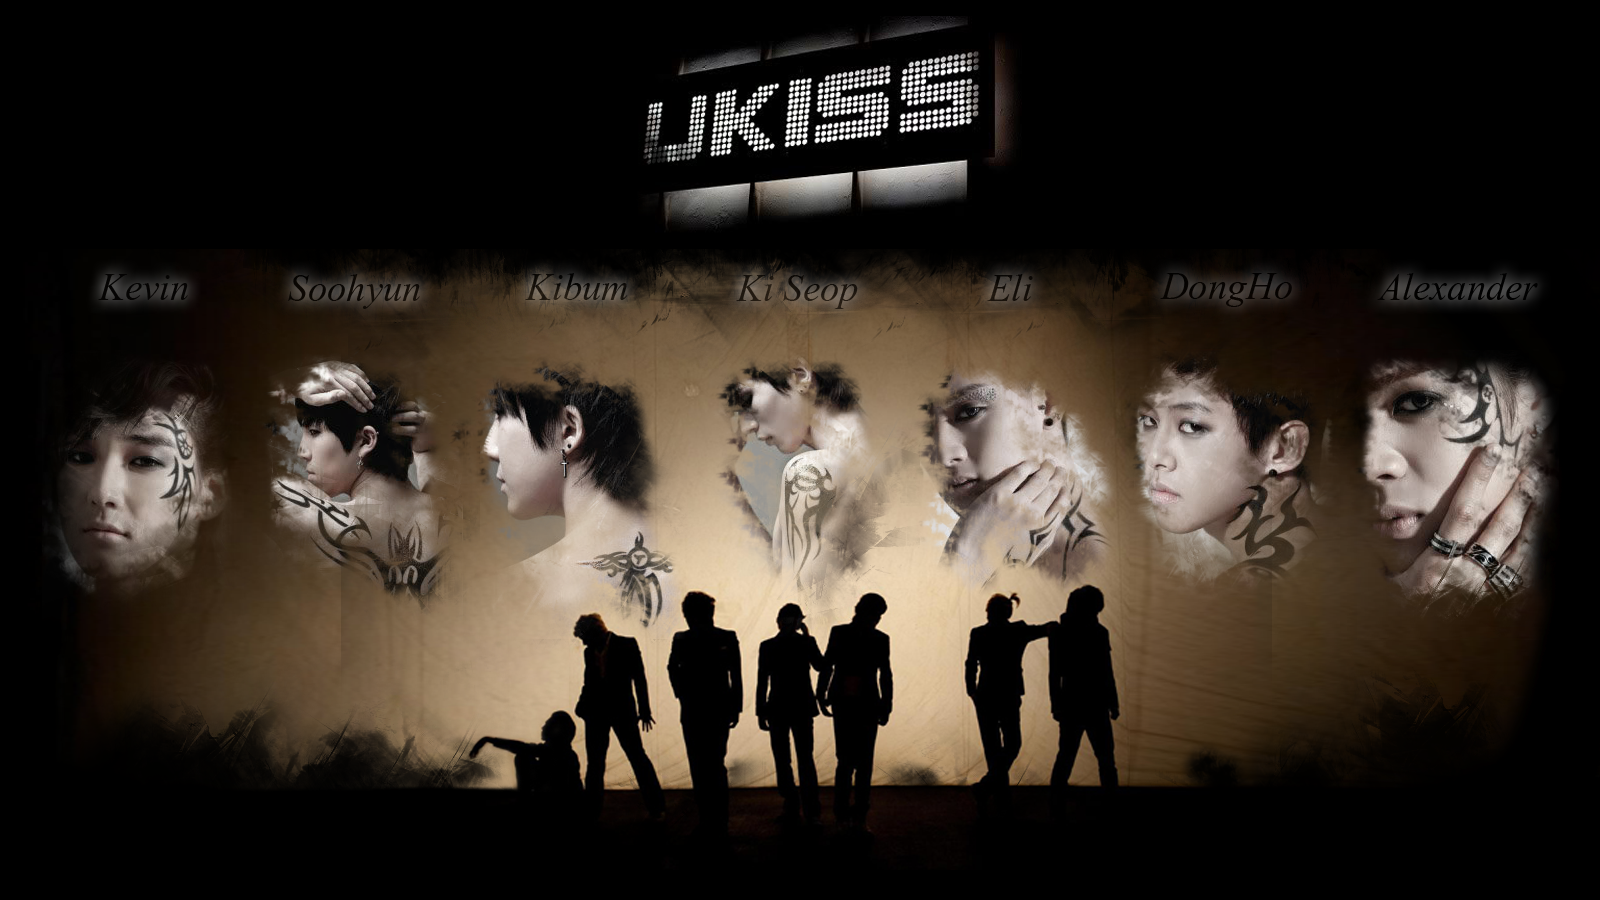 UKISS - THE ONLY ONE ''.....: '...UKISS PICTURE = MAN MAN HA NI ...